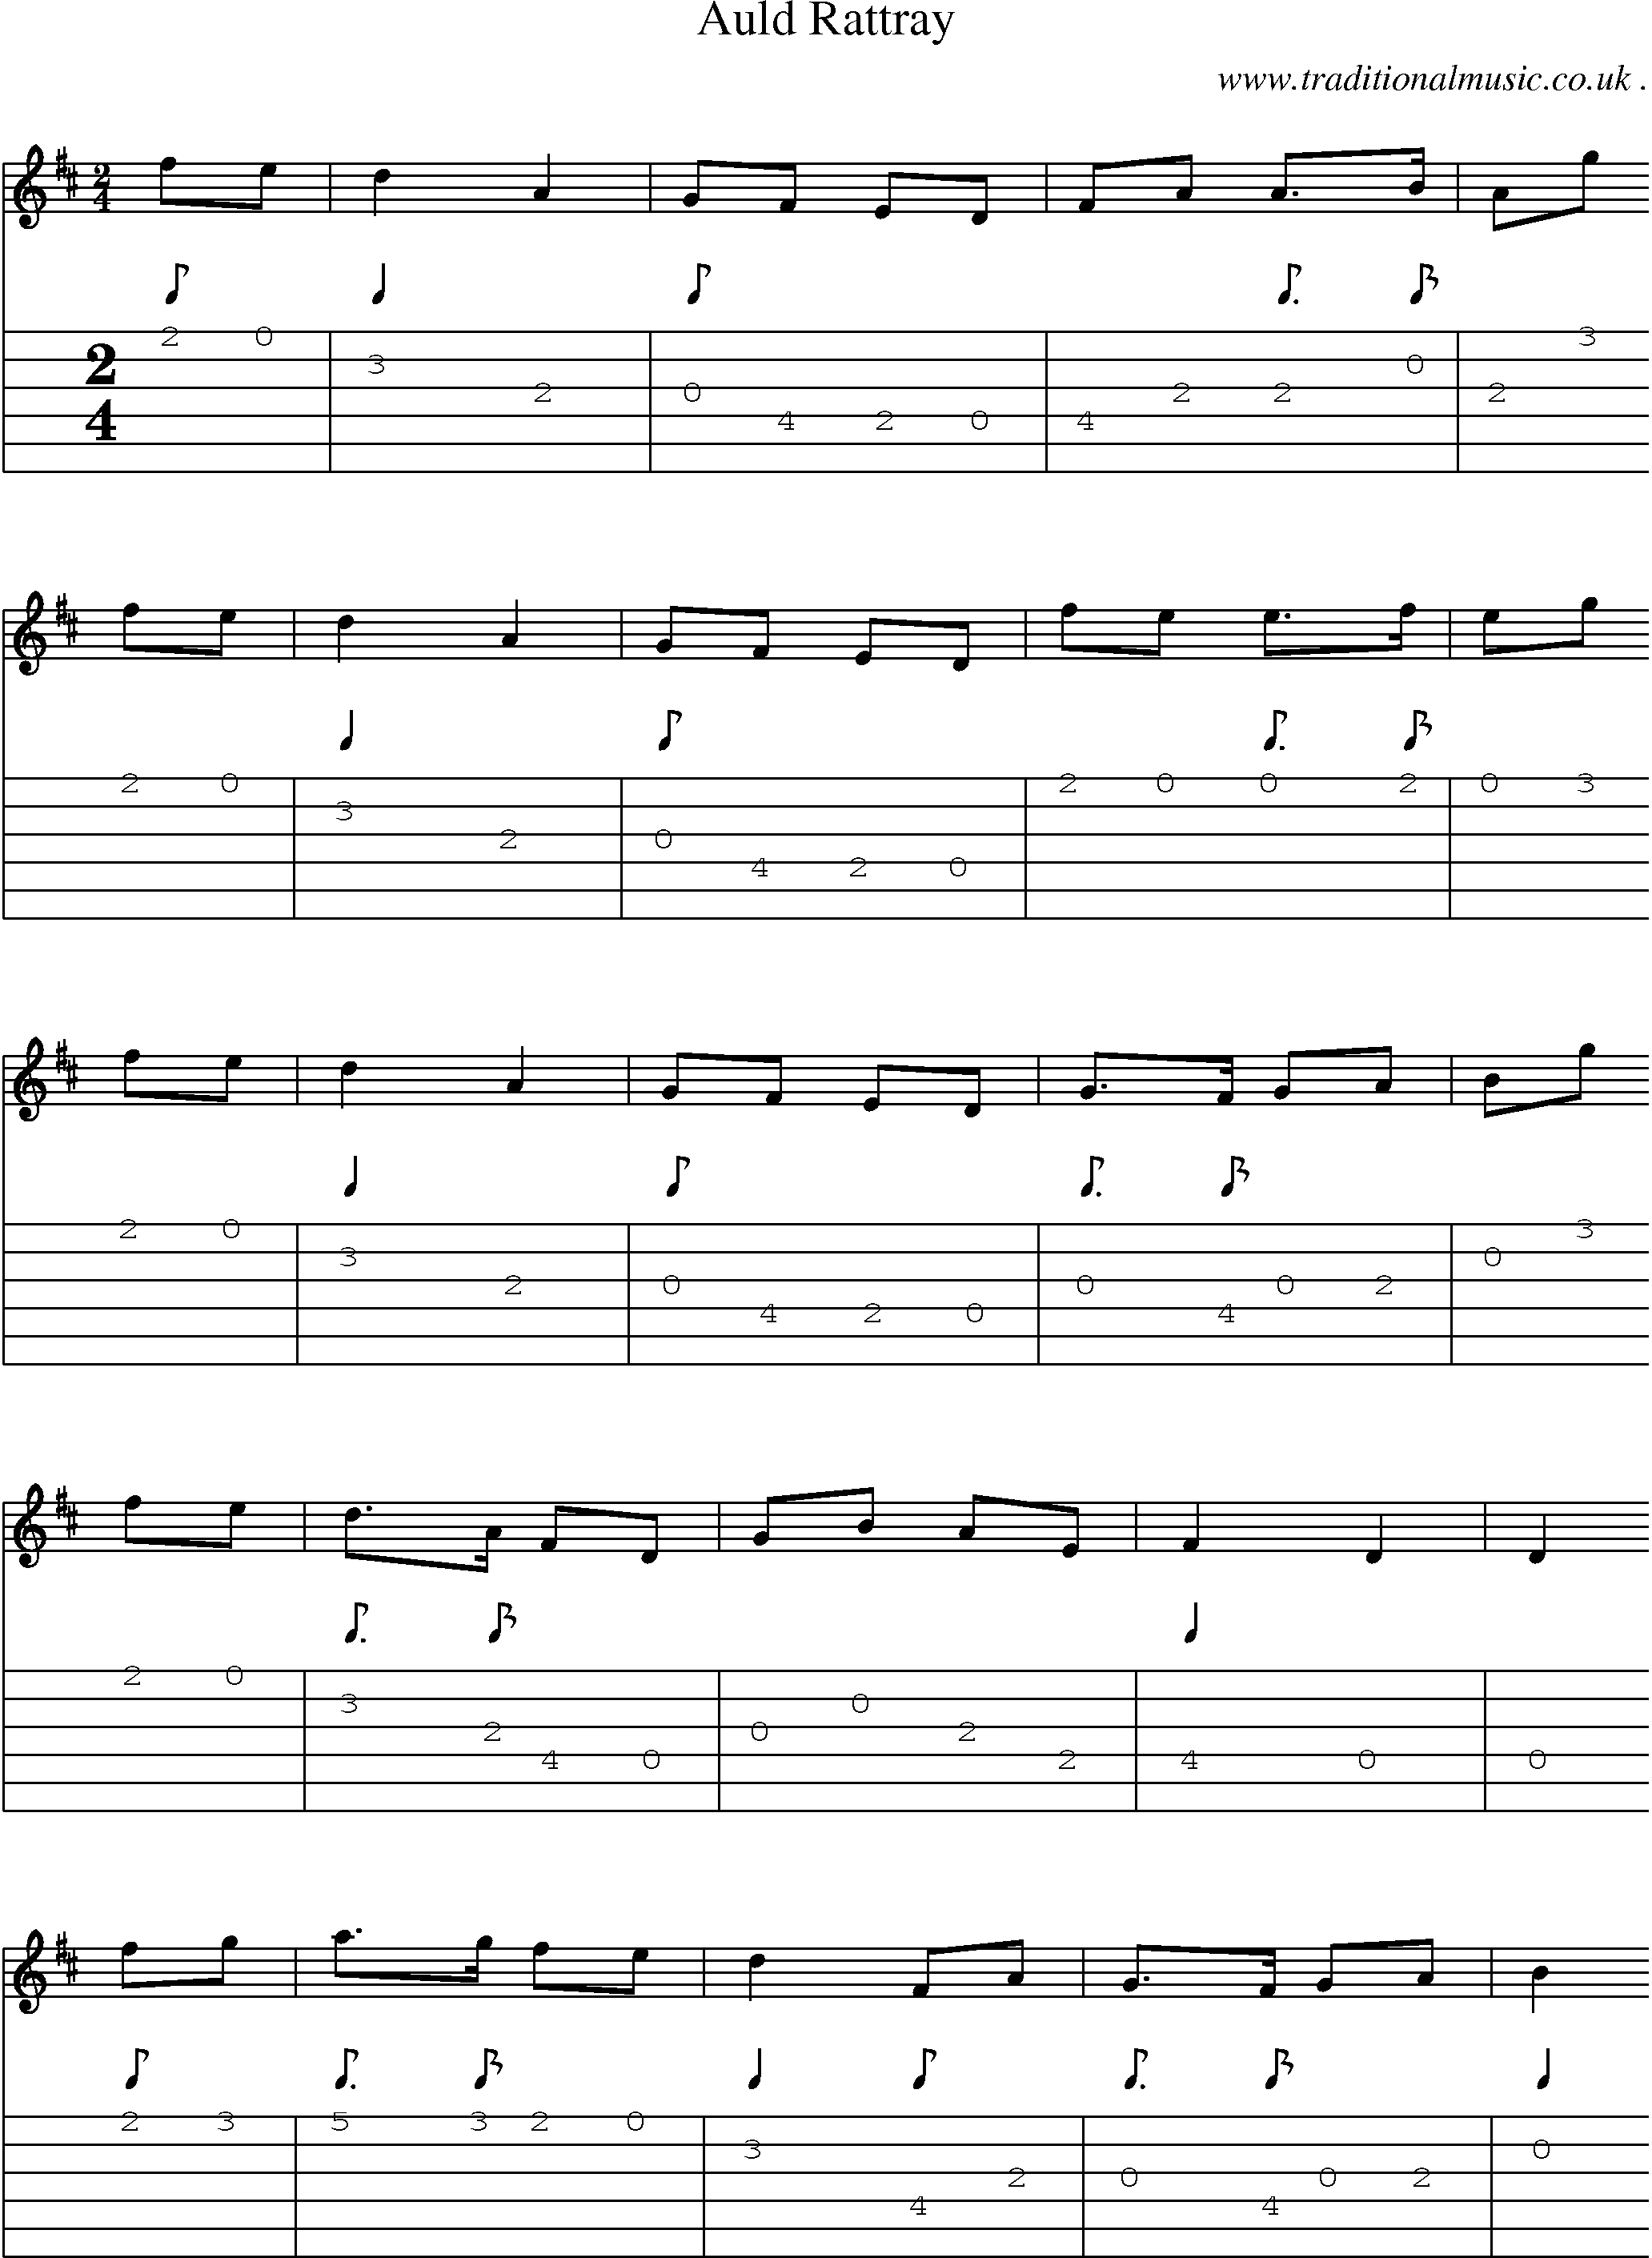 Sheet-music  score, Chords and Guitar Tabs for Auld Rattray